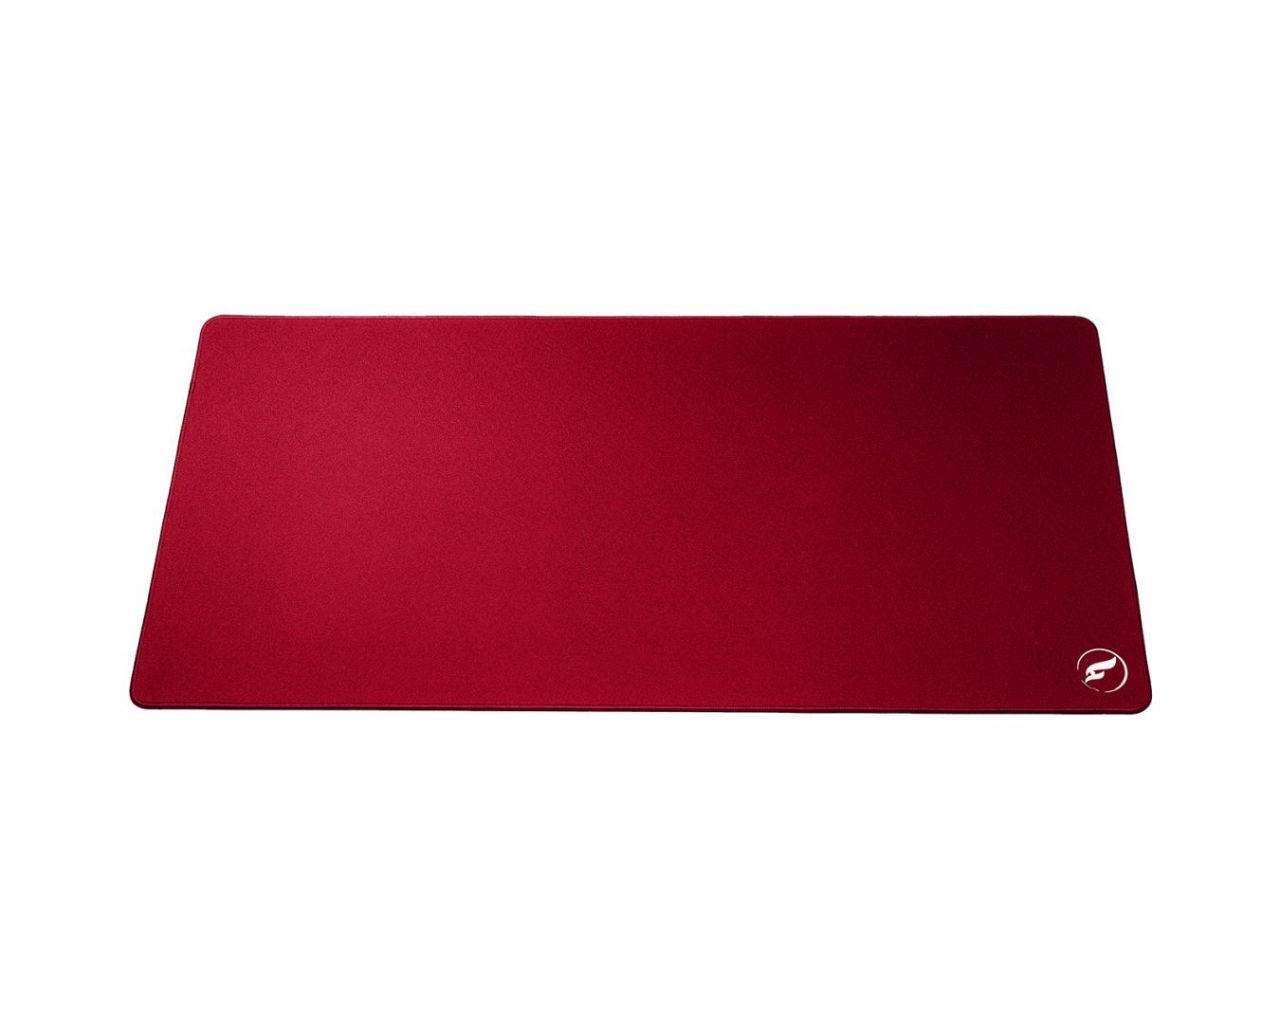 Odin Gaming Infinity V2 2XL Hybrid Gaming Mouse Pad Cosmic Red